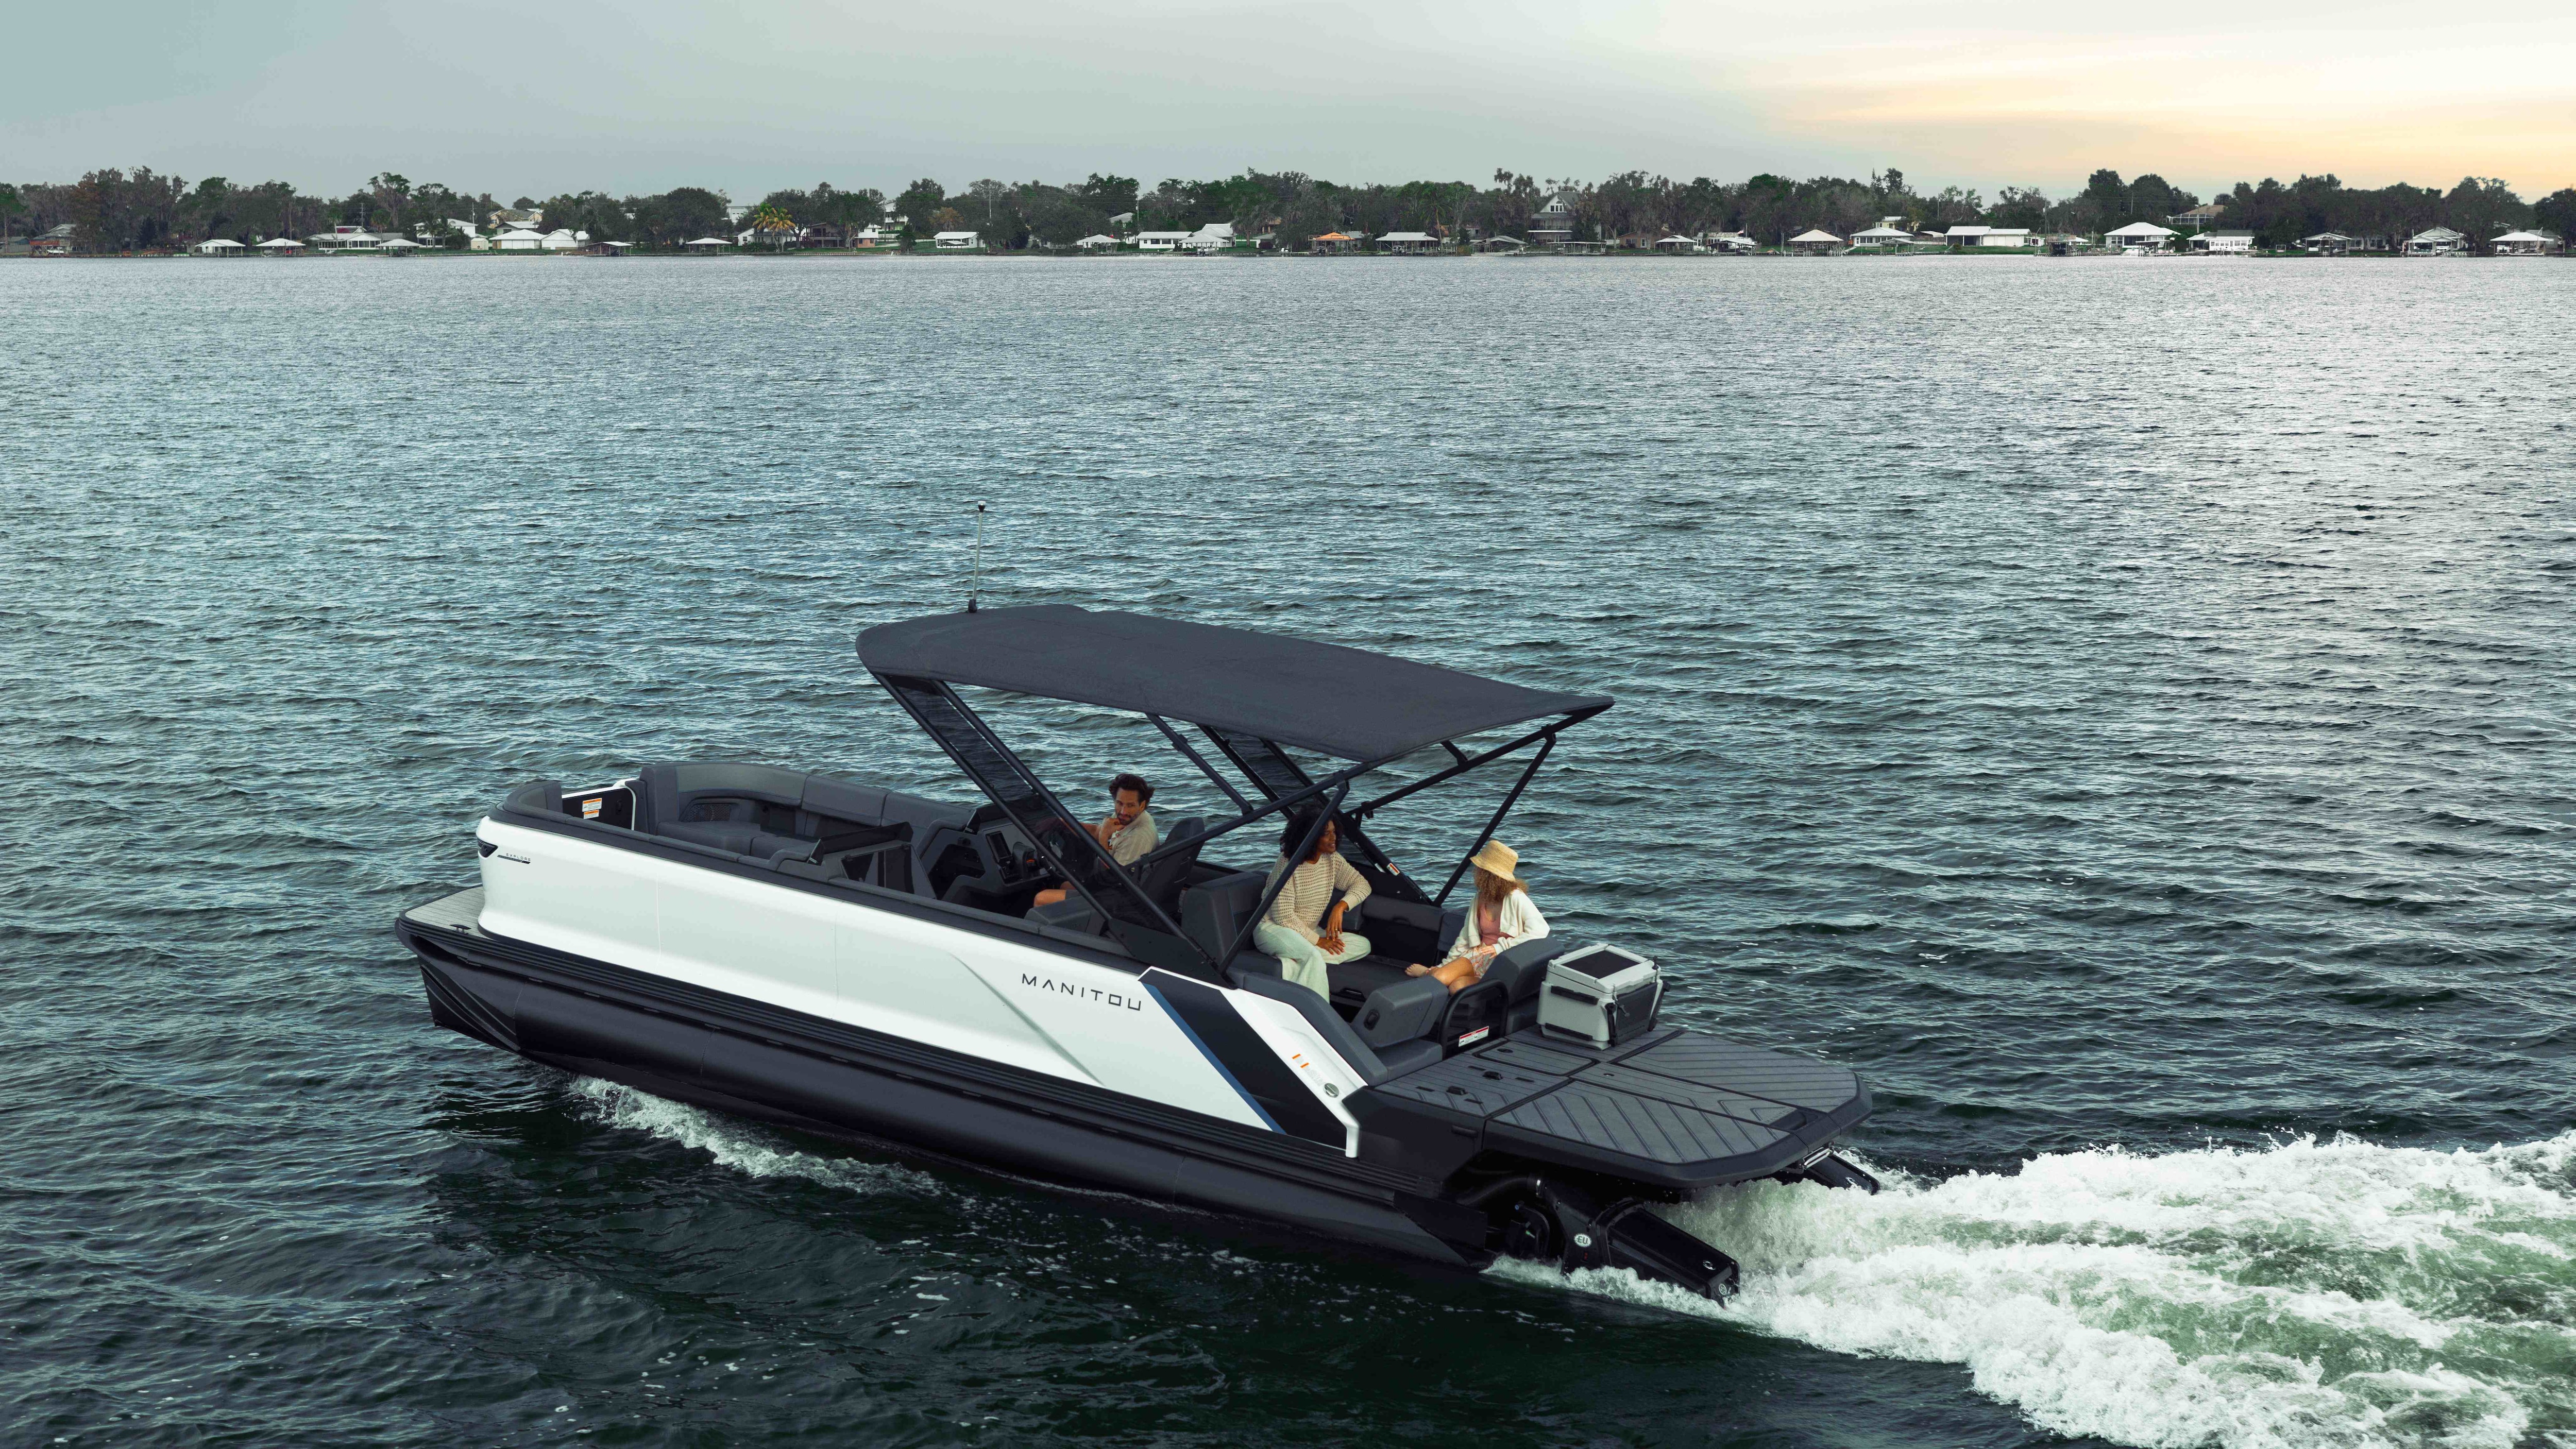 Boat of the Year in the Pontoon Category